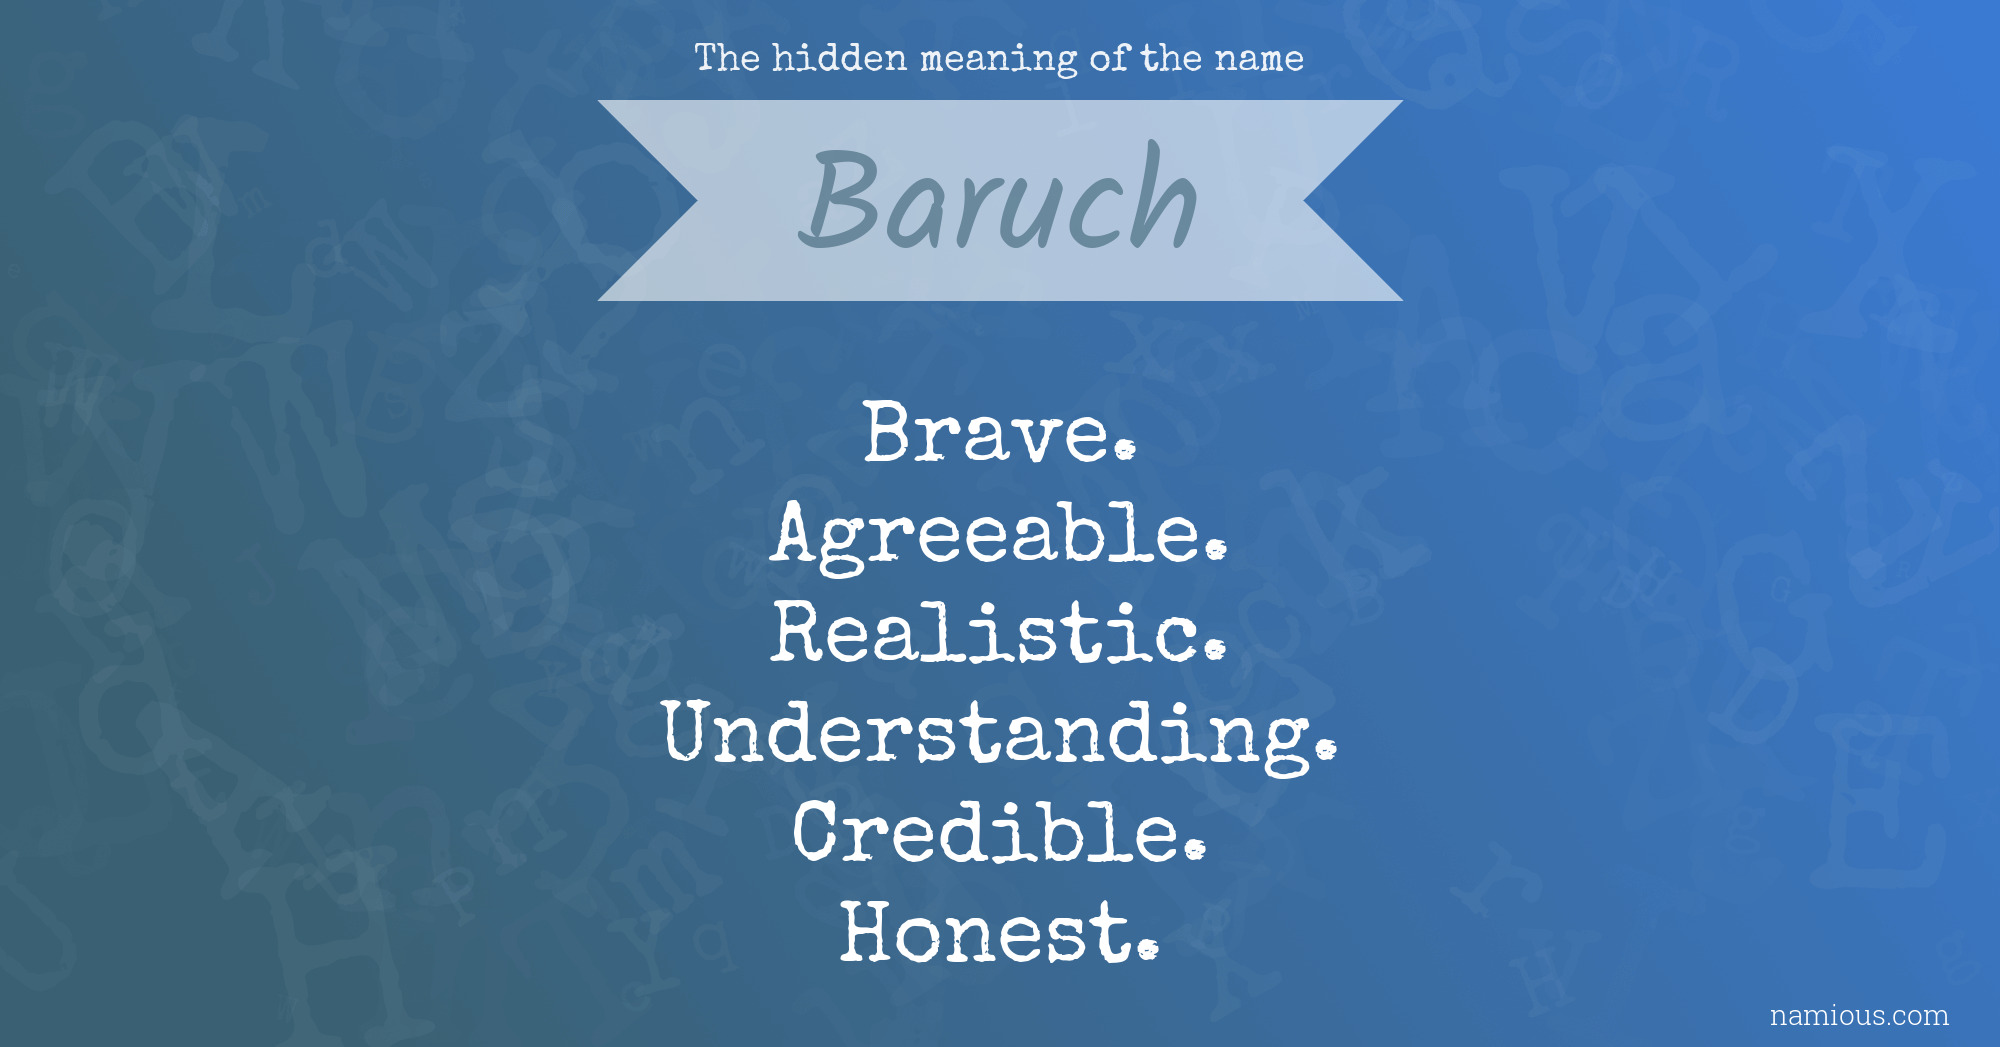 The hidden meaning of the name Baruch